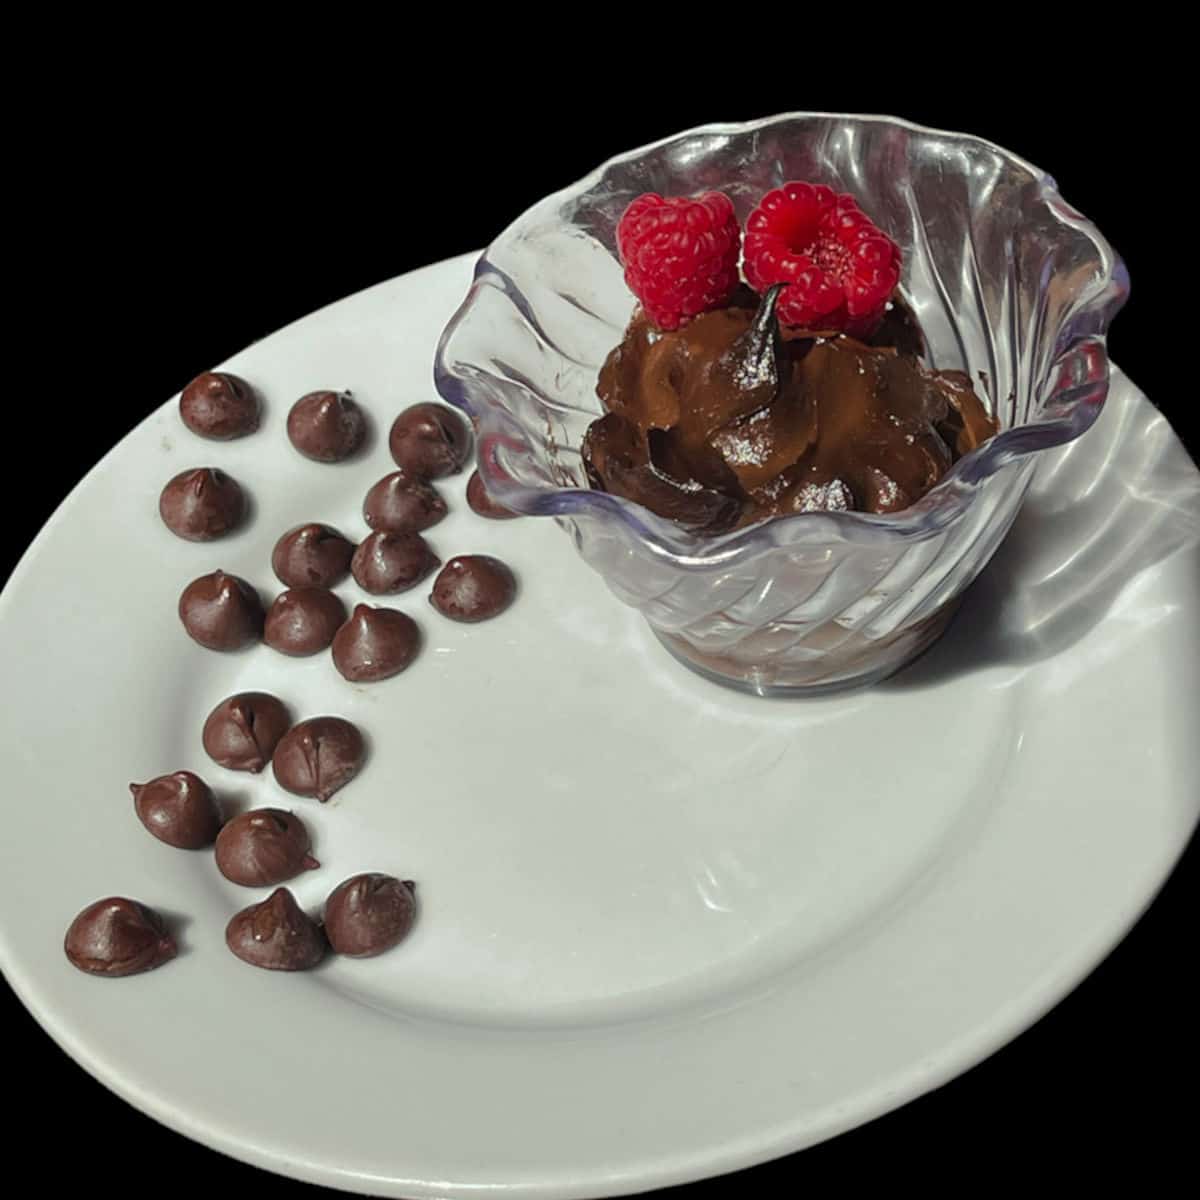 chocolate pudding I a clear decorative container on a white plate garnished with chocolate chips